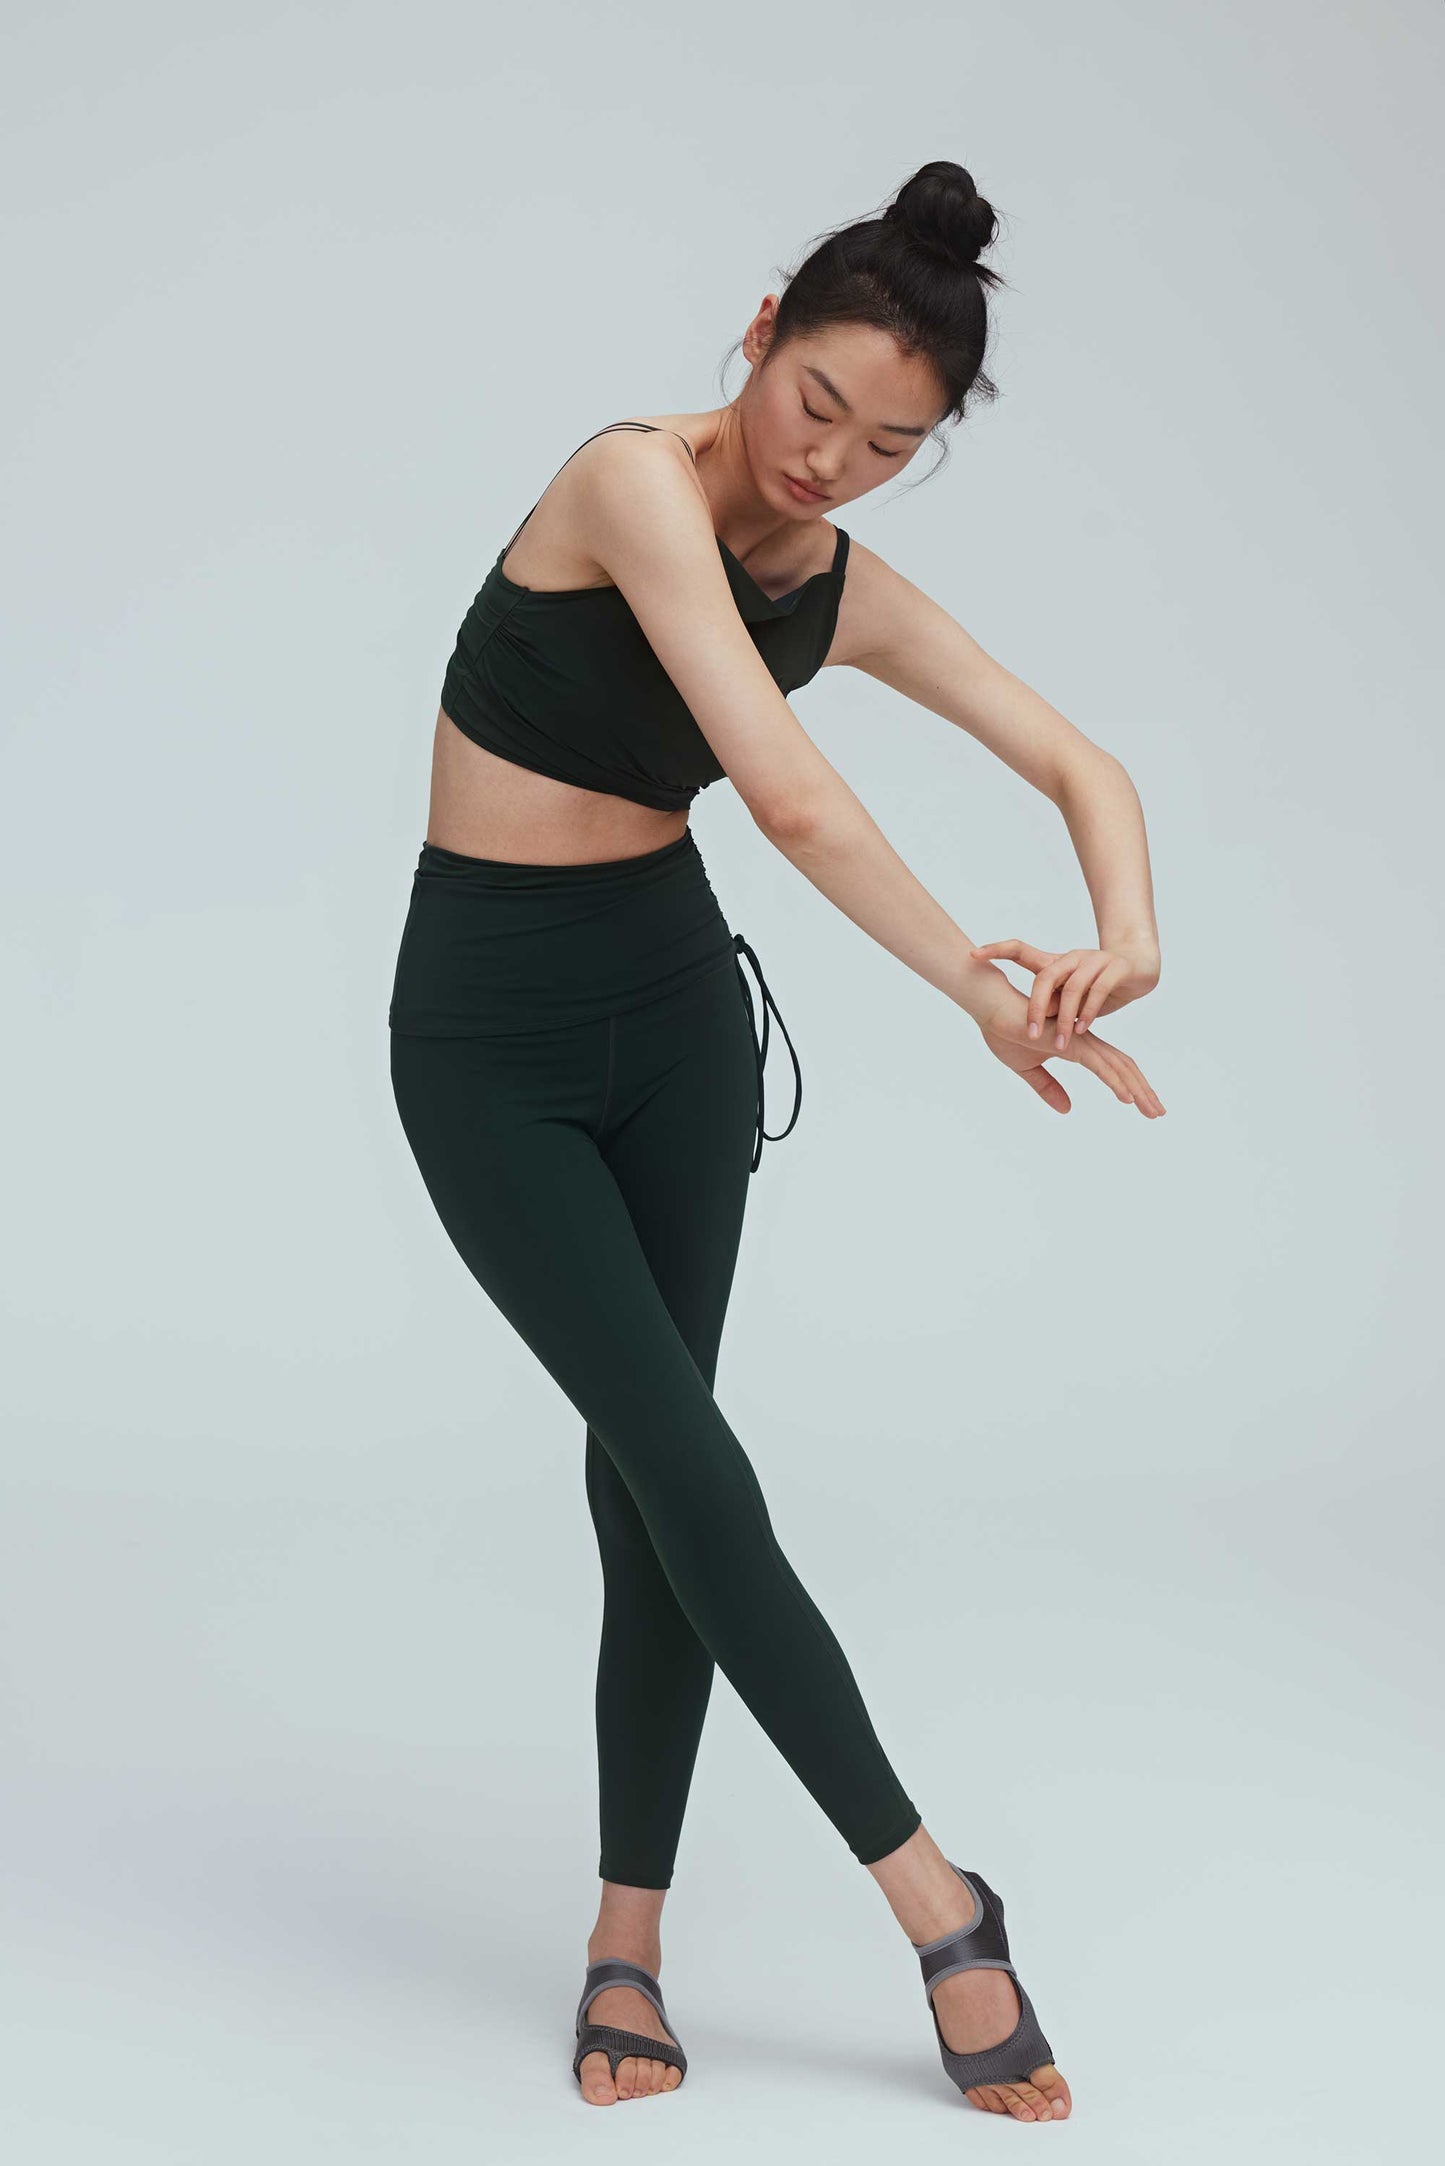 a woman doing a dance pose wearing a crew neck dark green sports bra with pleats details and a pair of matching leggings with double layered waist and side knot.